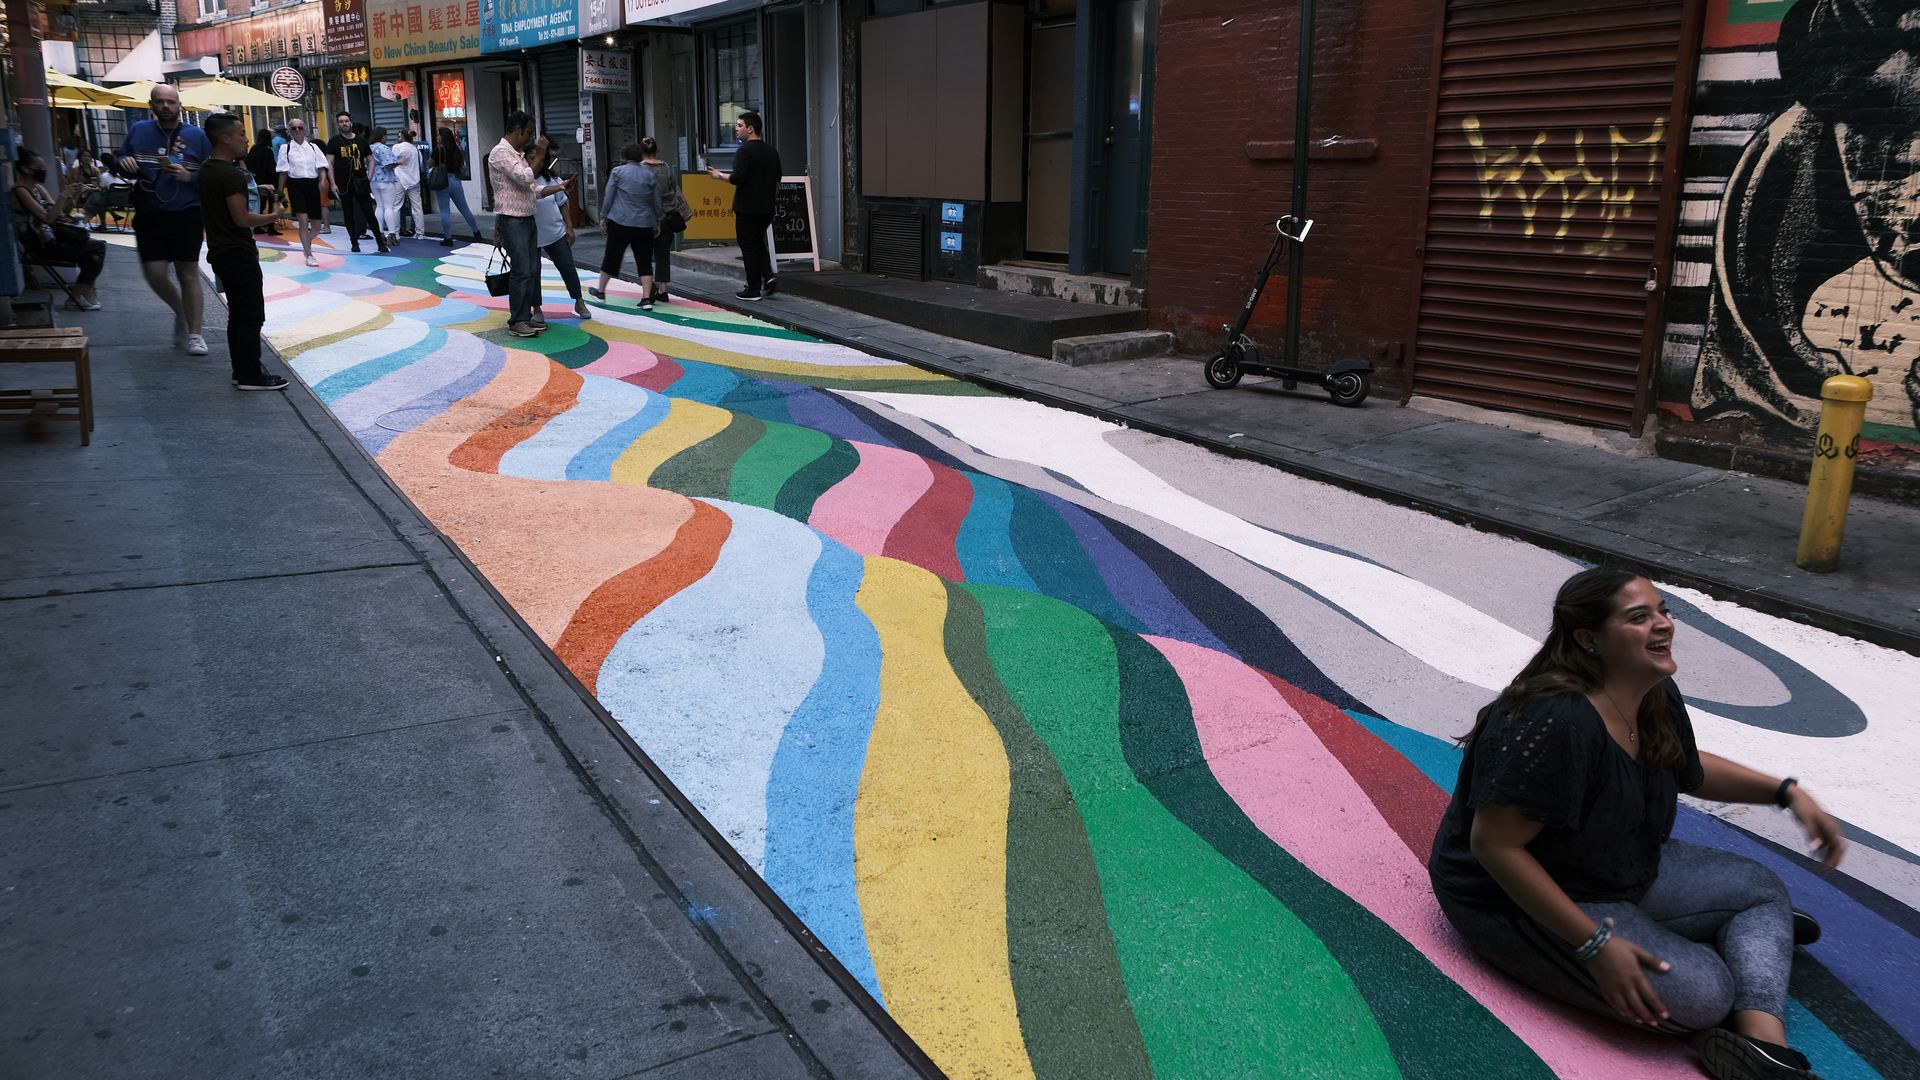 A street in NYC's Chinatown that has been closed to traffic and painted by an artist.